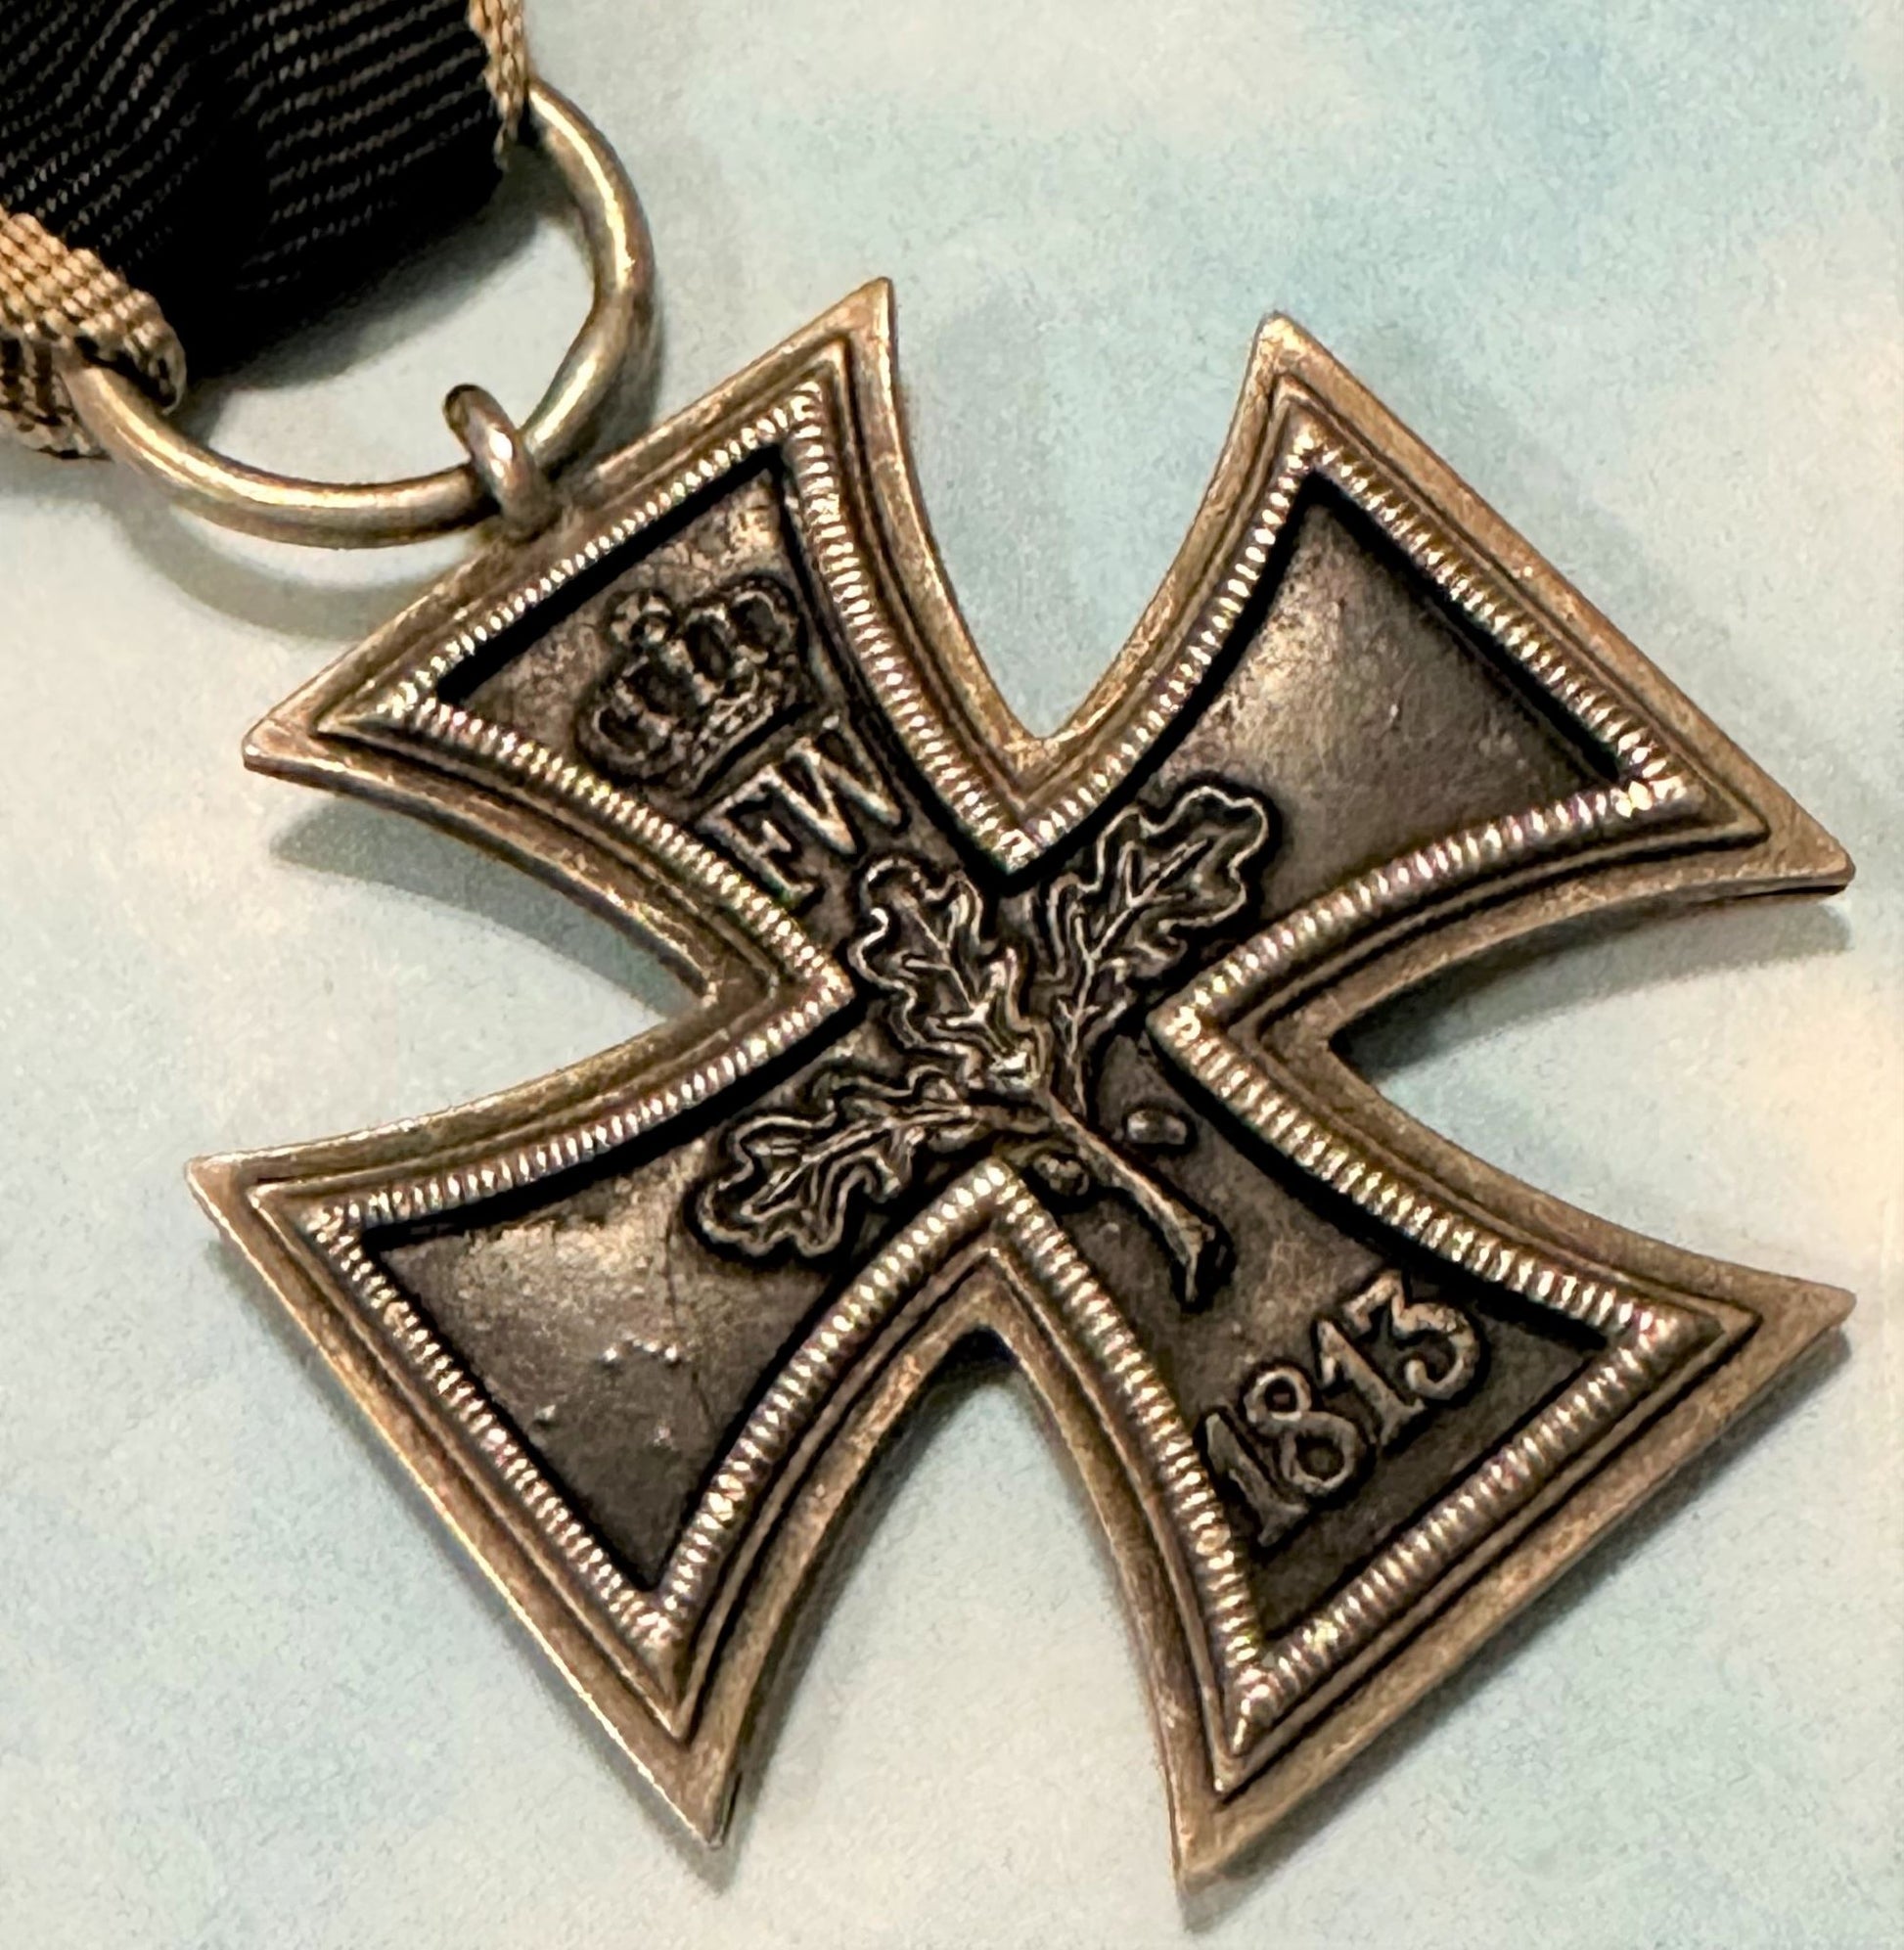 German Iron Cross 1870 2nd Class with 25 year Oak Leaves - Derrittmeister Militaria Group